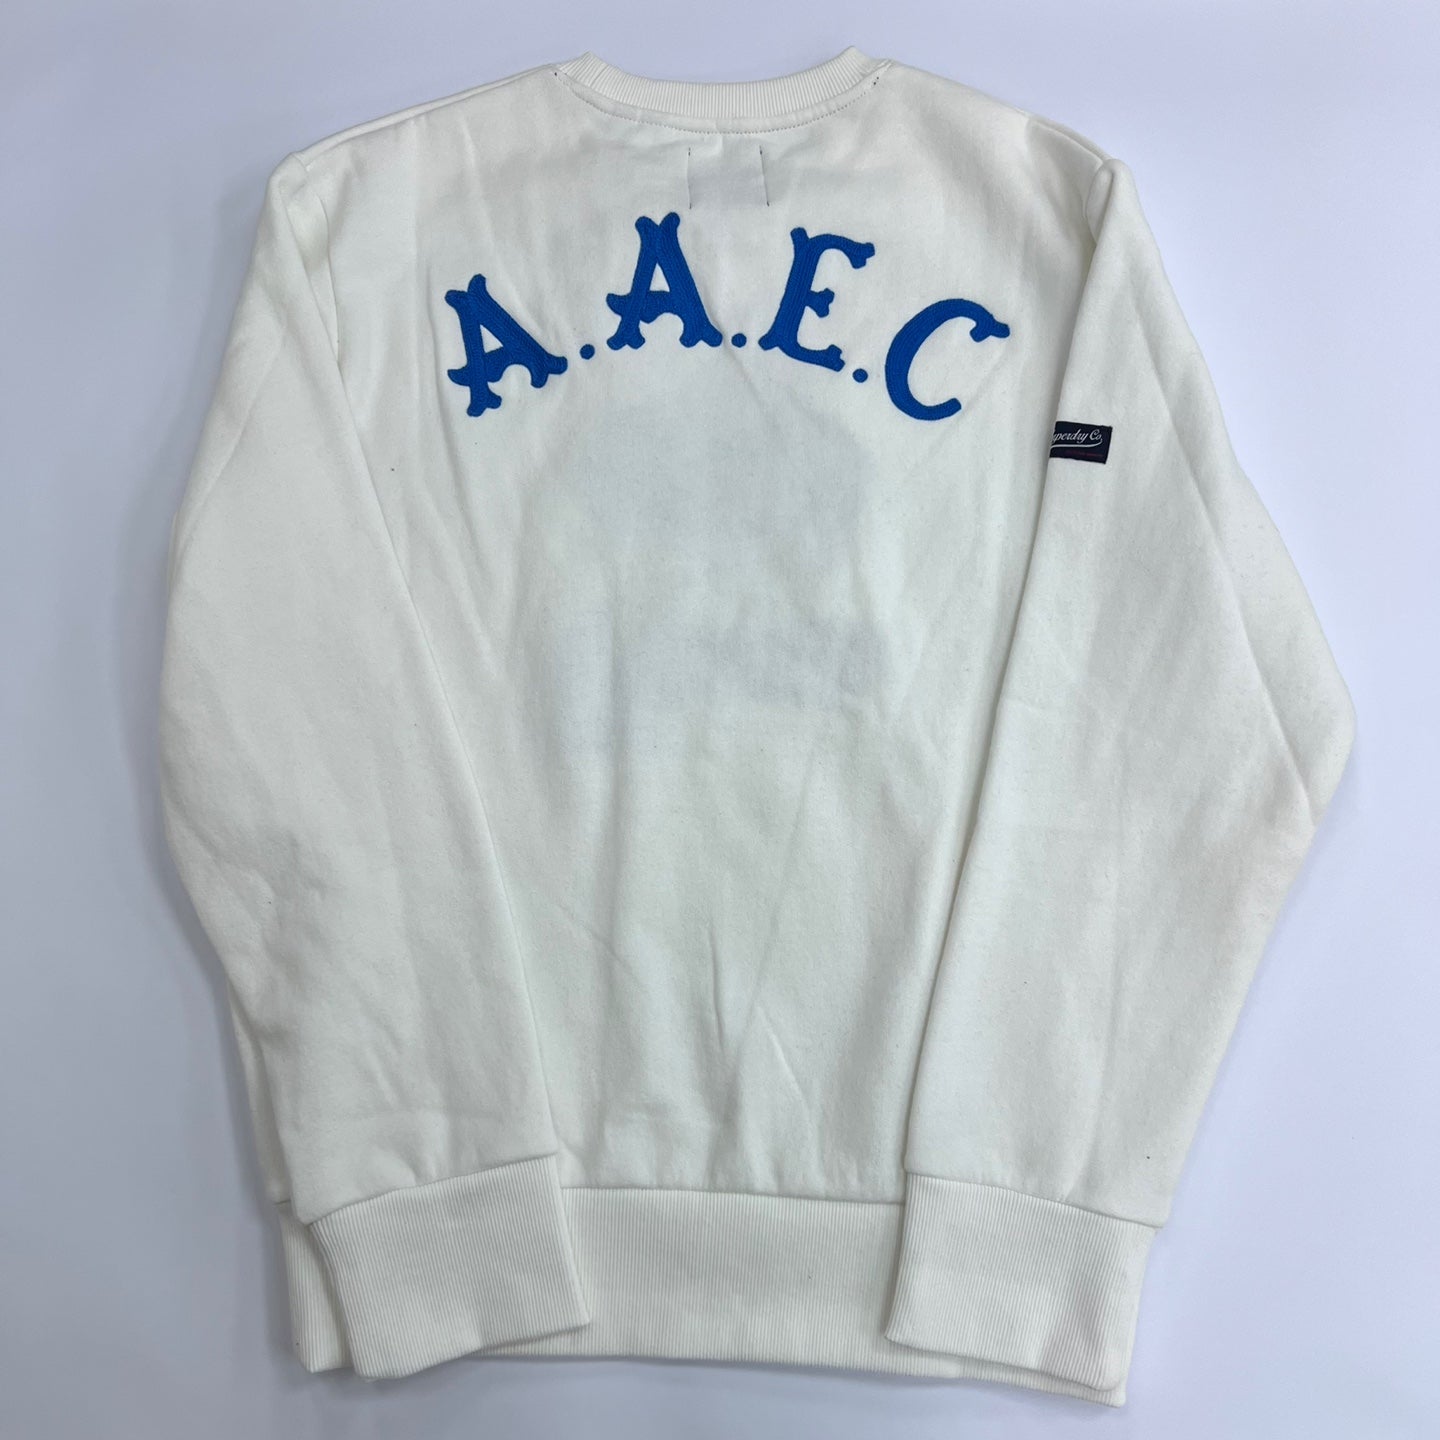 SUPERDRY Grizzly's AAEC Pullover Sweatshirt